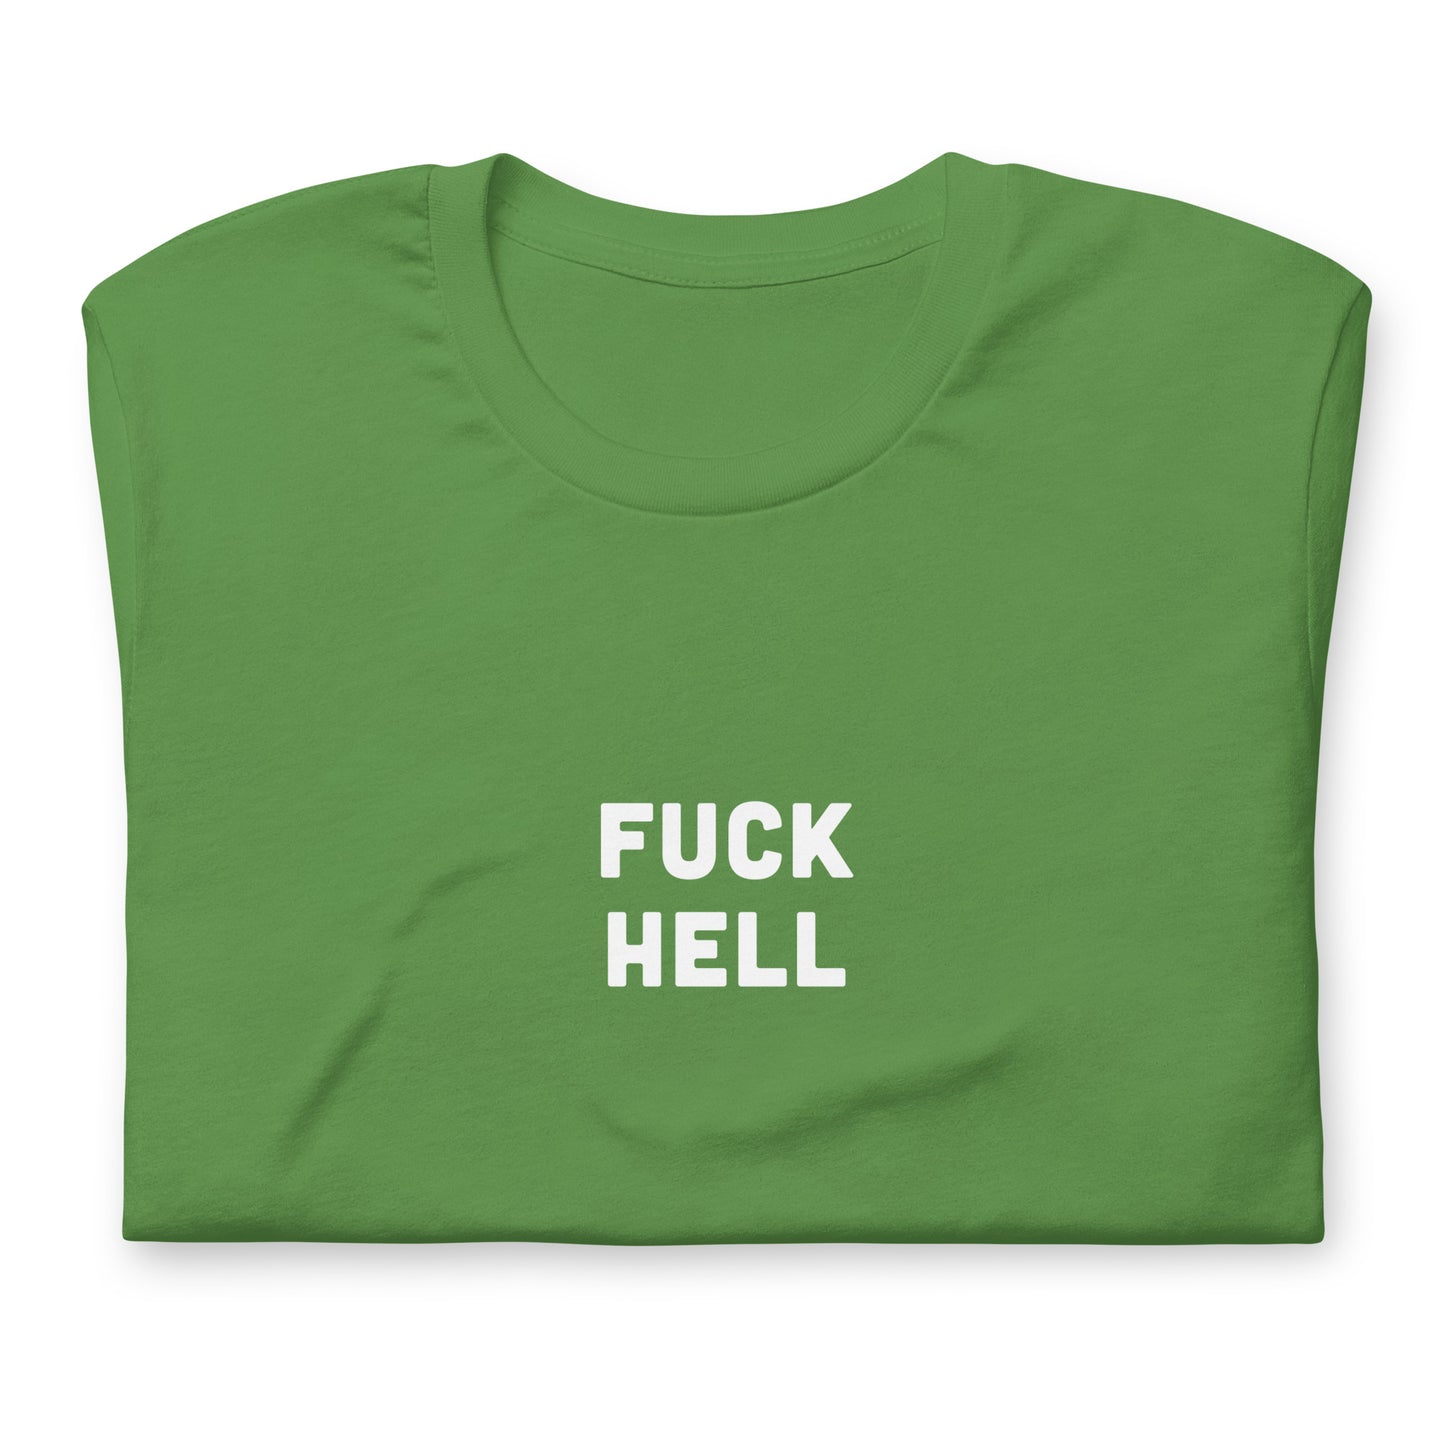 Fuck Hell T-Shirt Size 2XL Color Navy